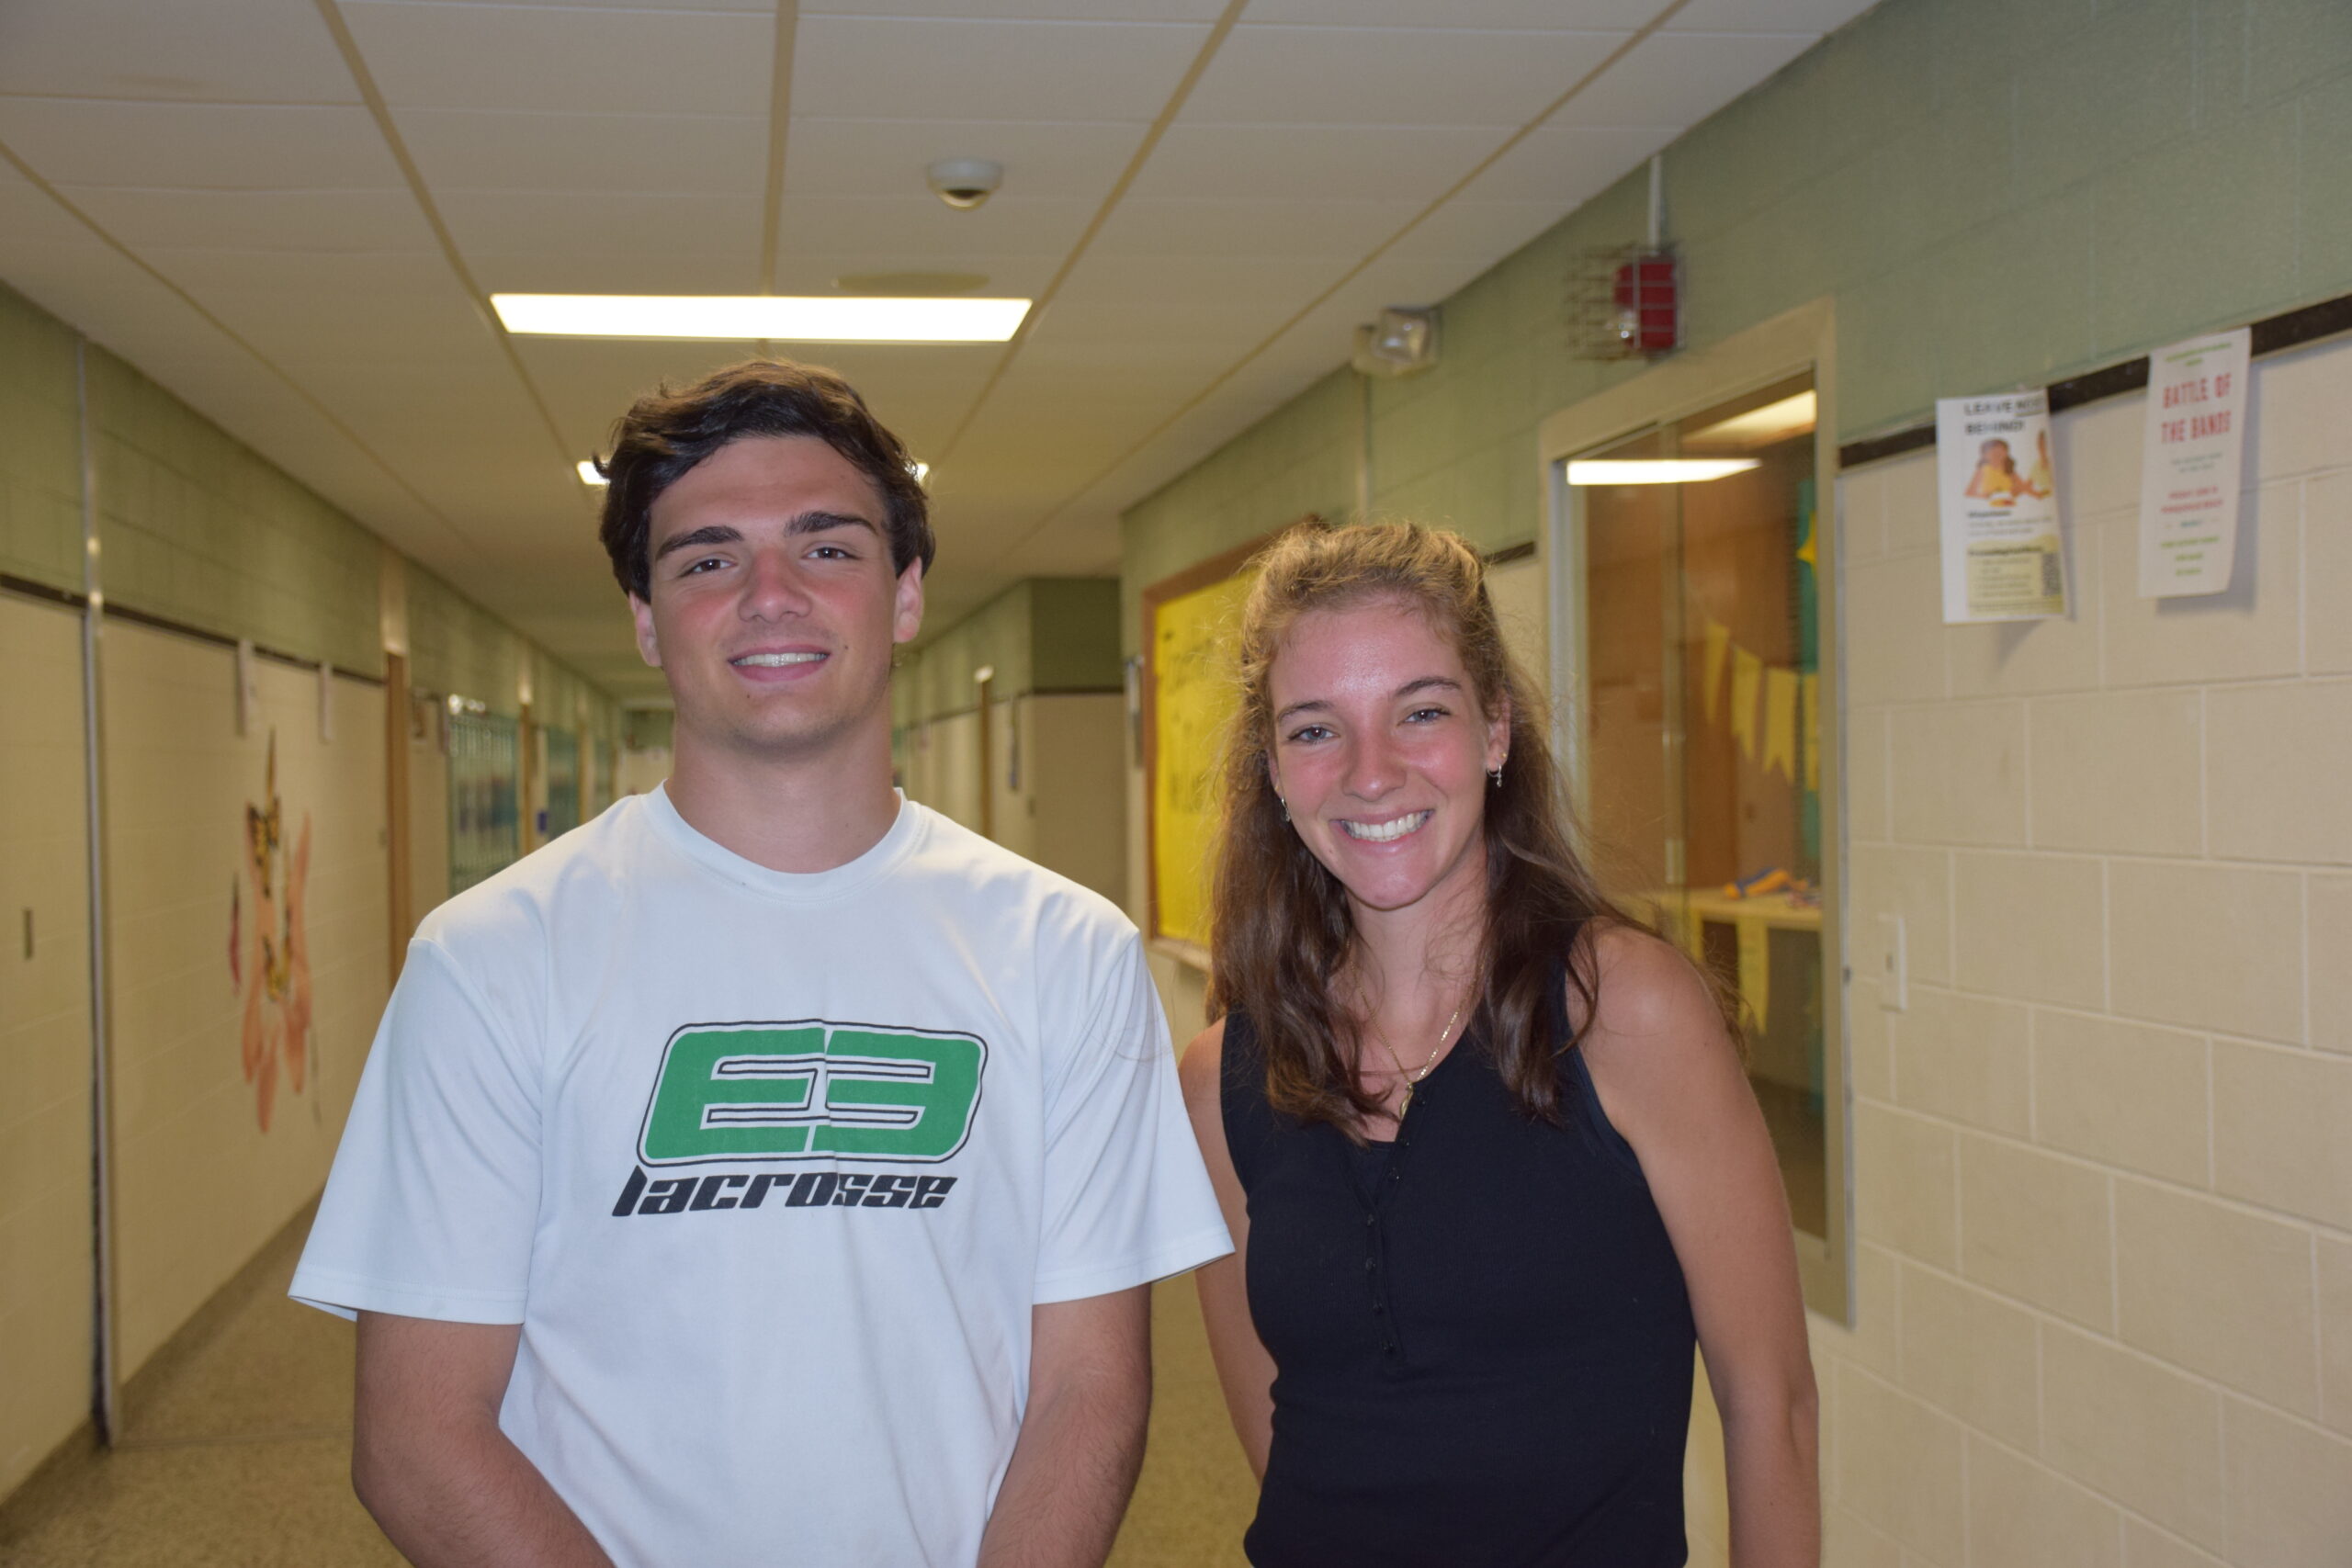 Geoff Arrasatte and Rose Hayes of Westhampton Beach High School have earned Top Scholar Athlete awards from the Long Island Press and Catholic Health. COURTESTY WESTHAMPTON BEACH SCHOOL DISTRICT